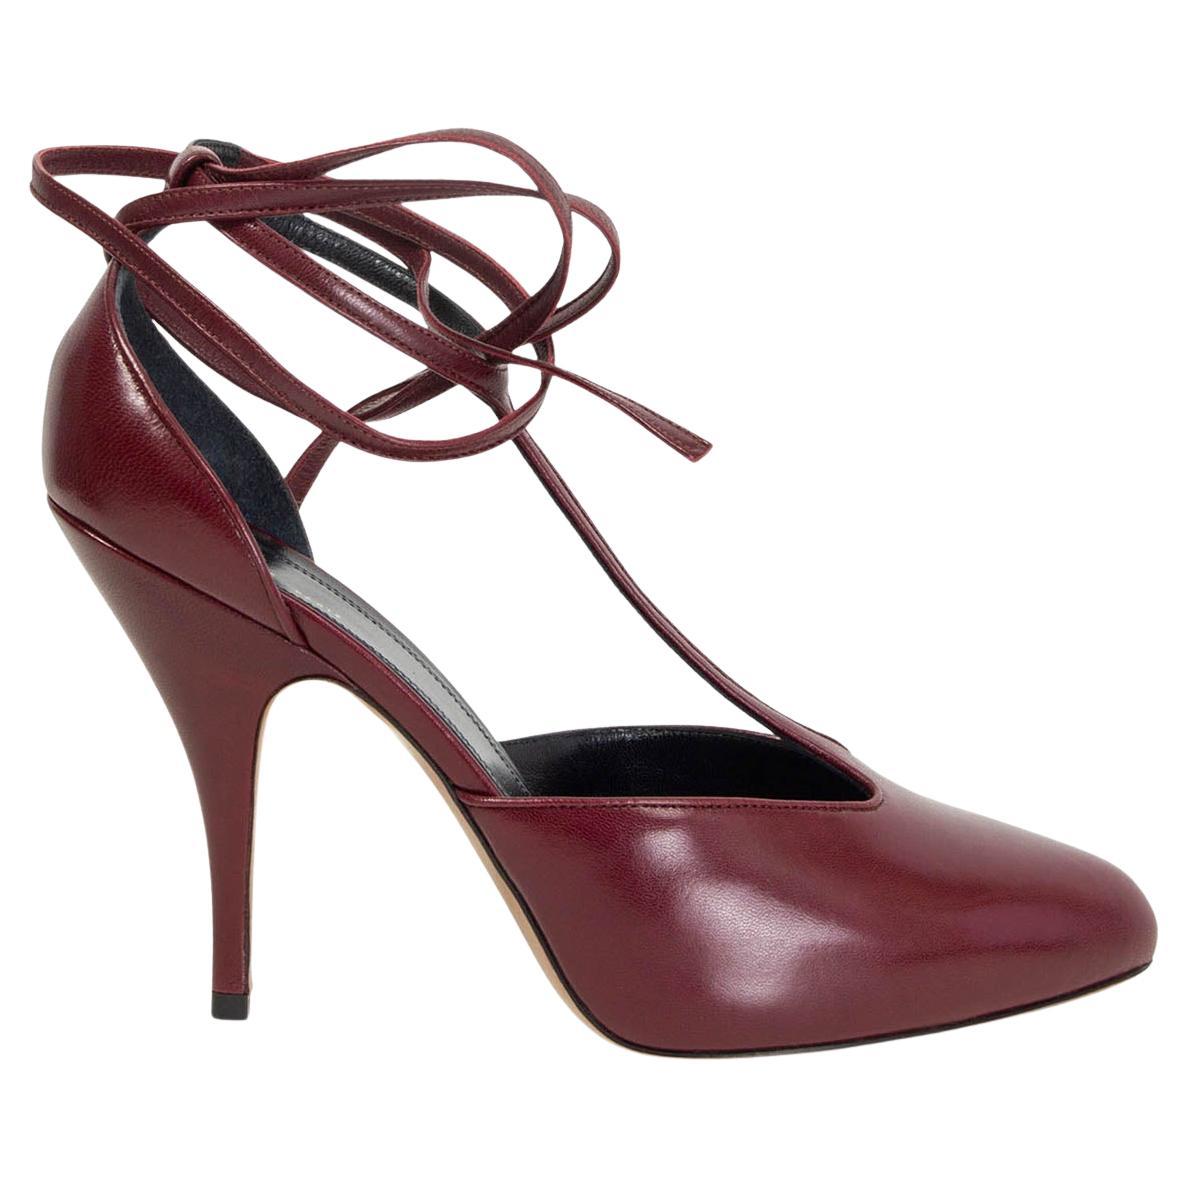 CELINE burgundy leather 2018 NIGHT OUT T-STRAP Pumps Shoes 38 at